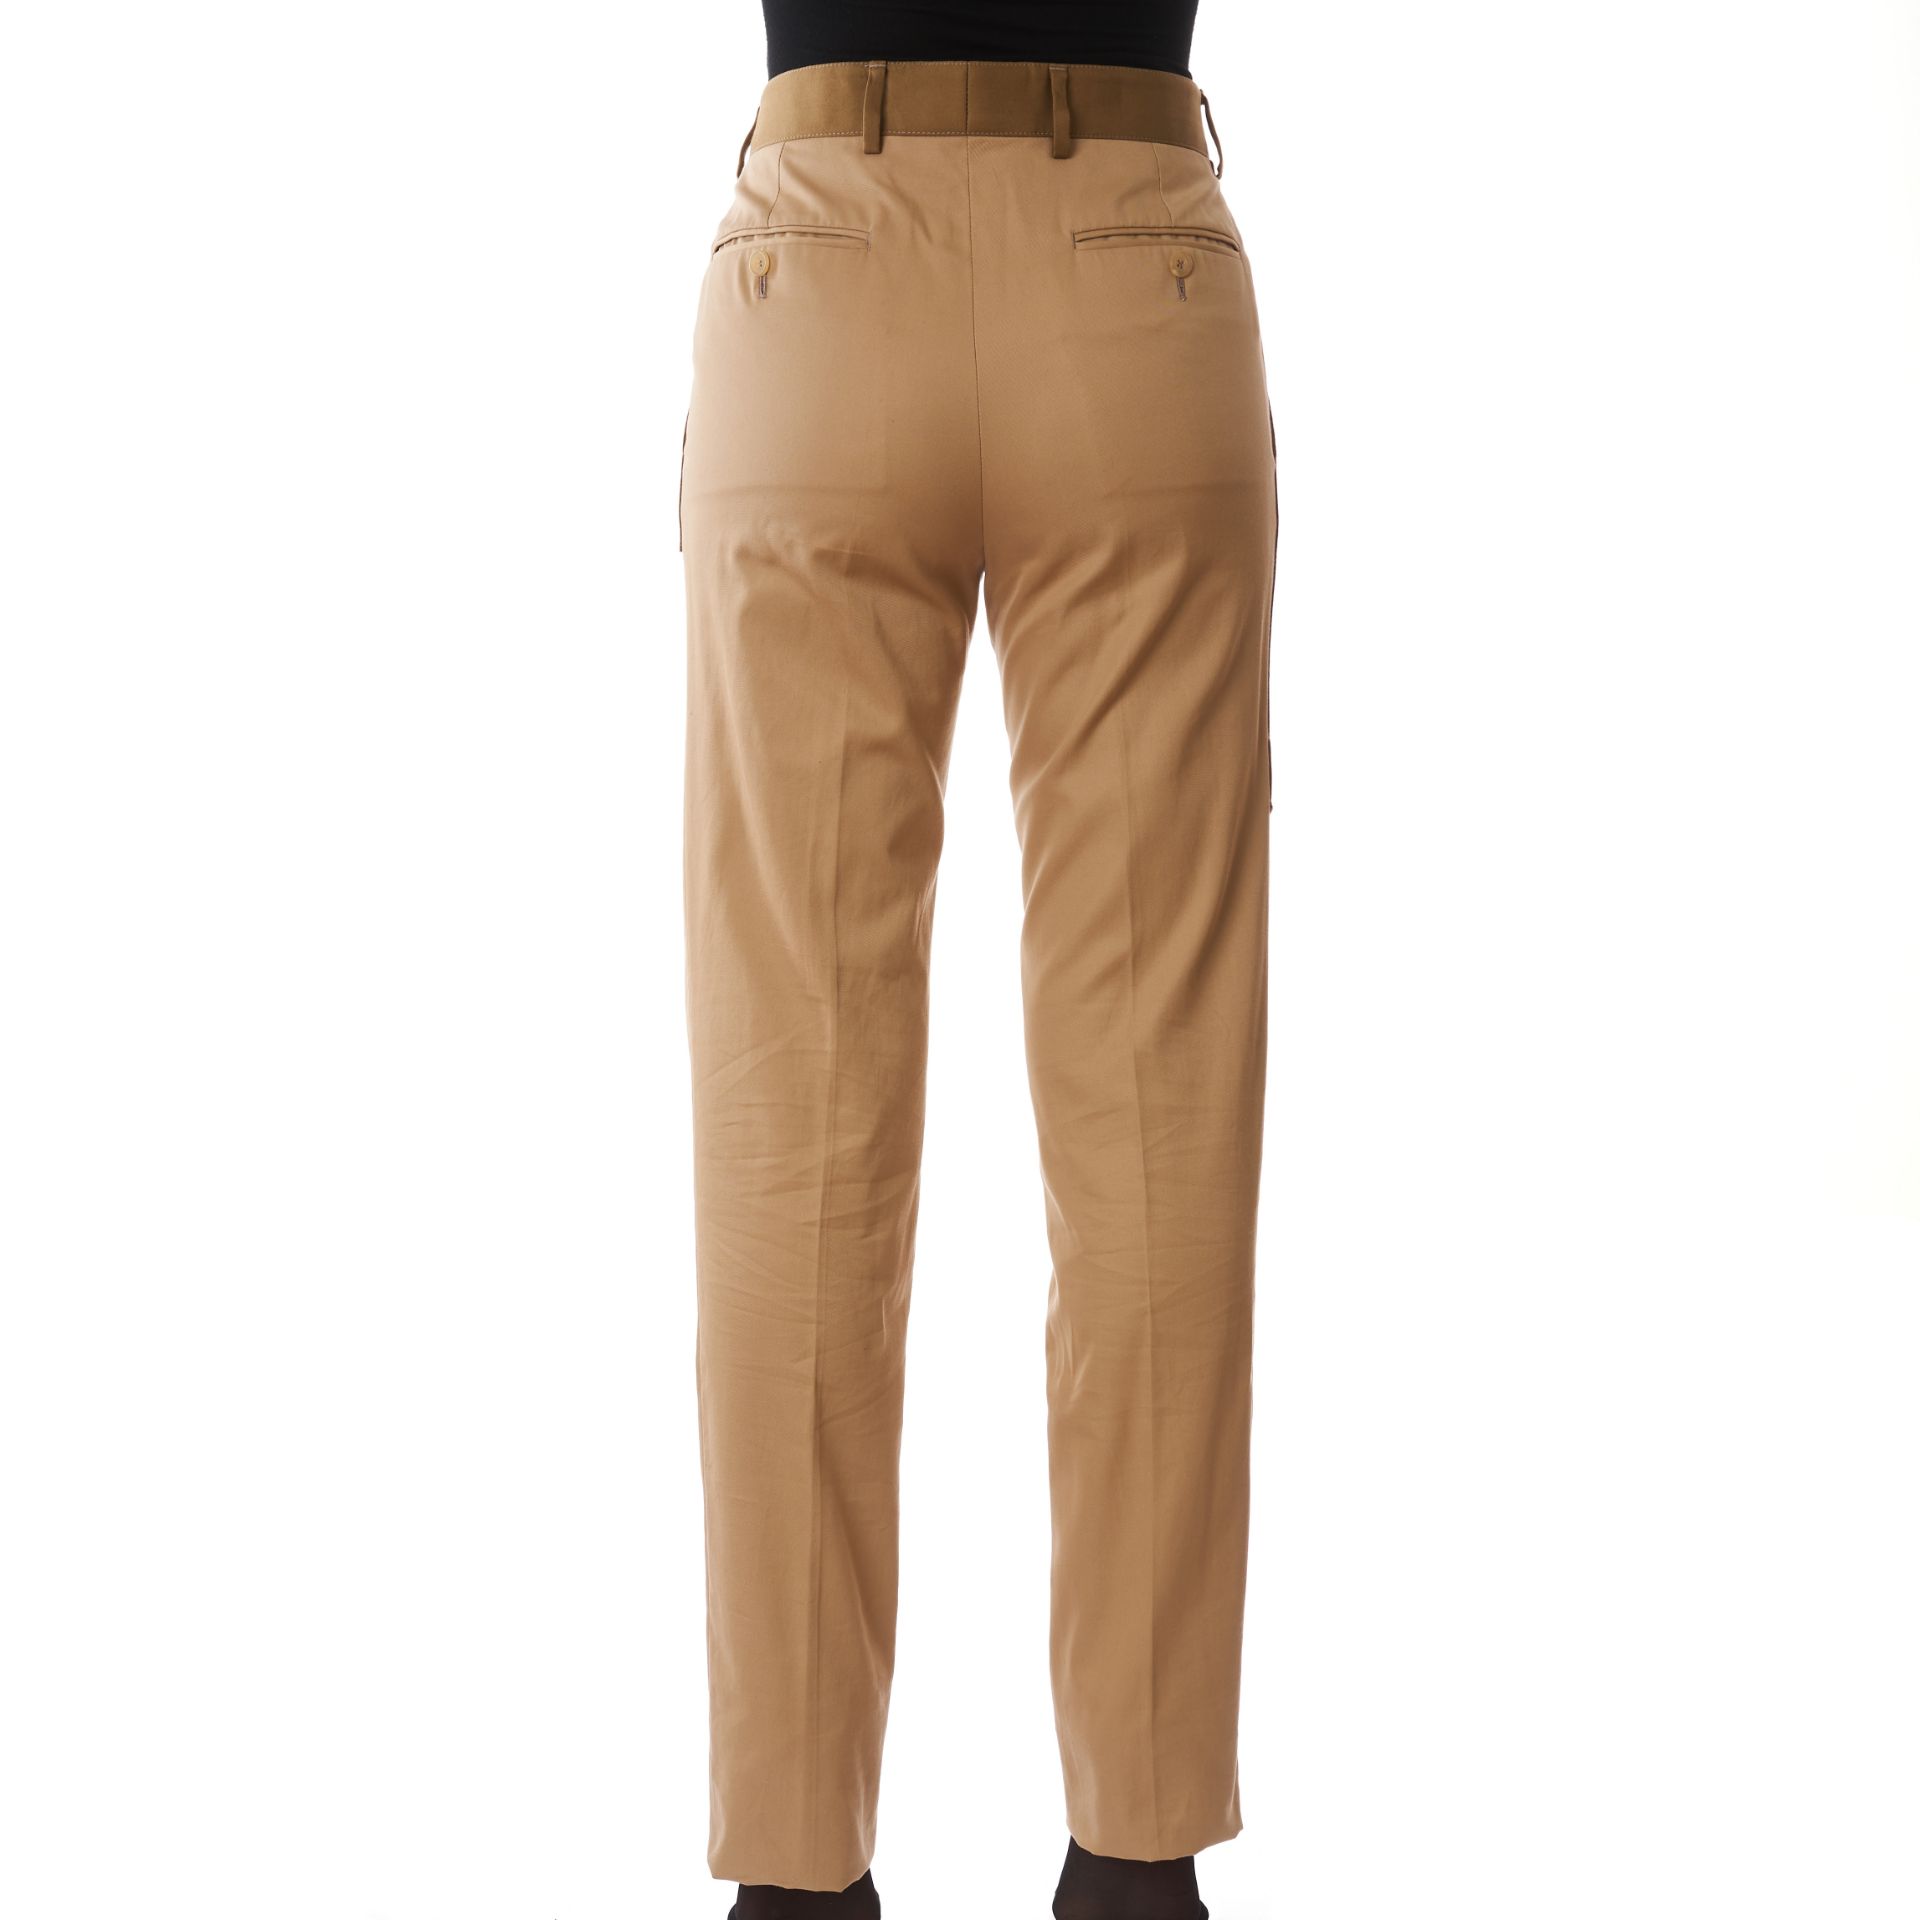 NO RESERVE ALEXANDER MCQUEEN TWO TONE BEIGE TROUSERS - Image 3 of 3